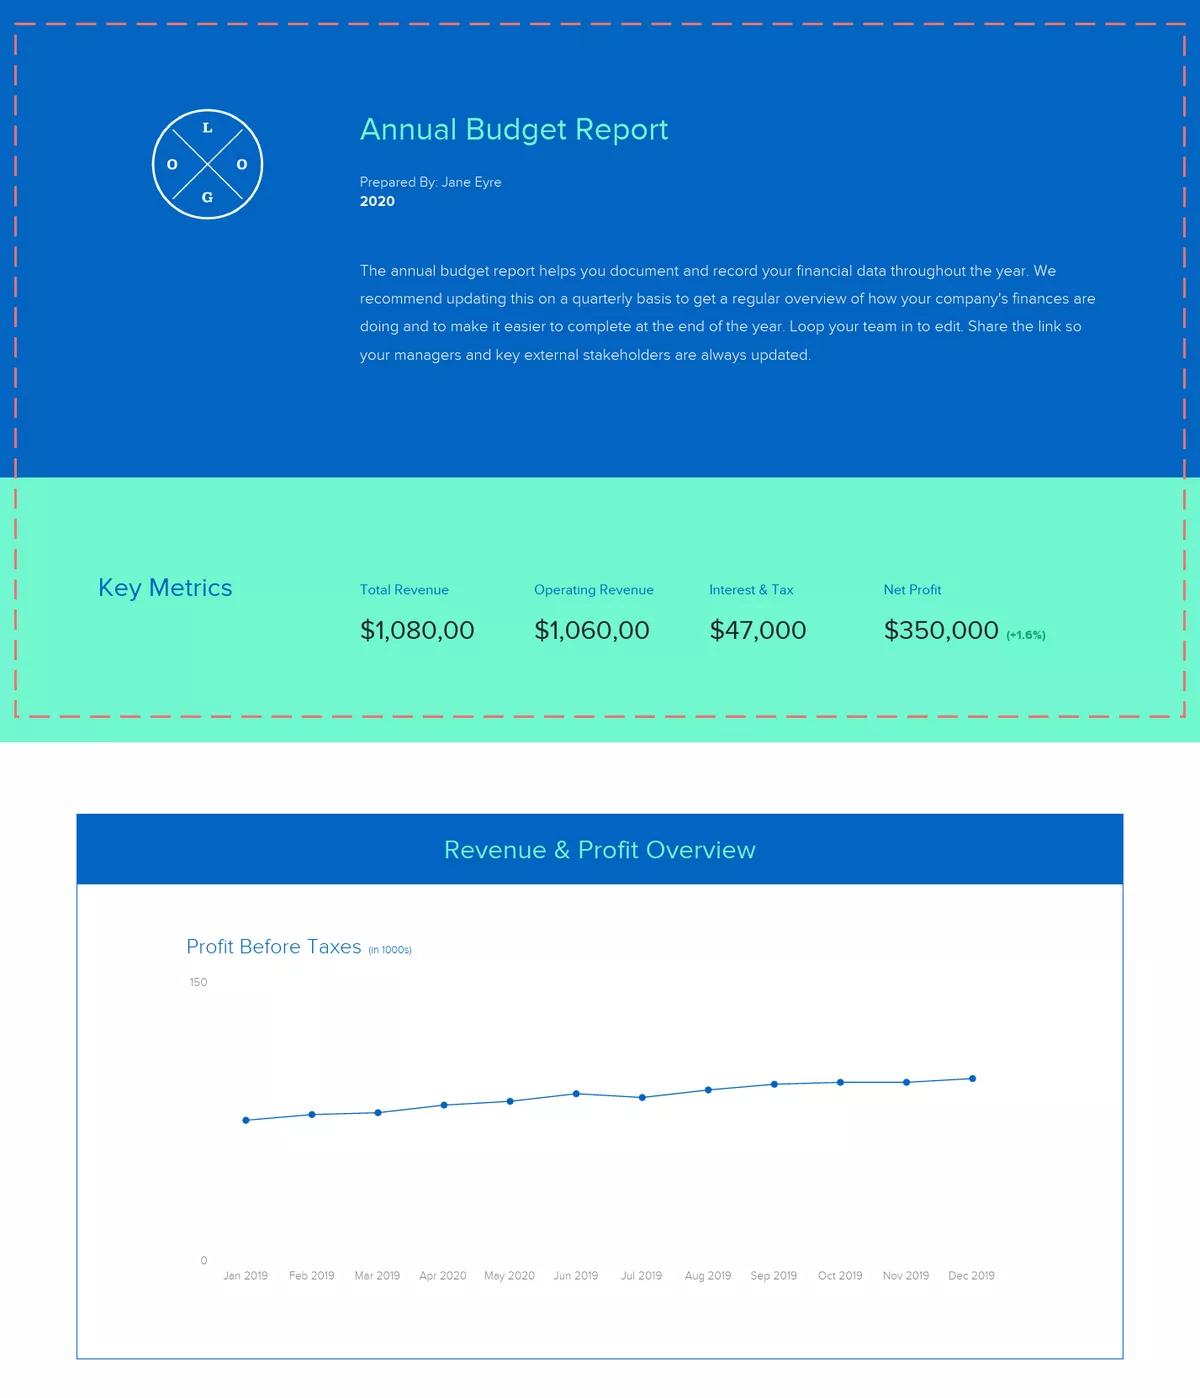 How To Create An Annual Budget Report | Create An Overview